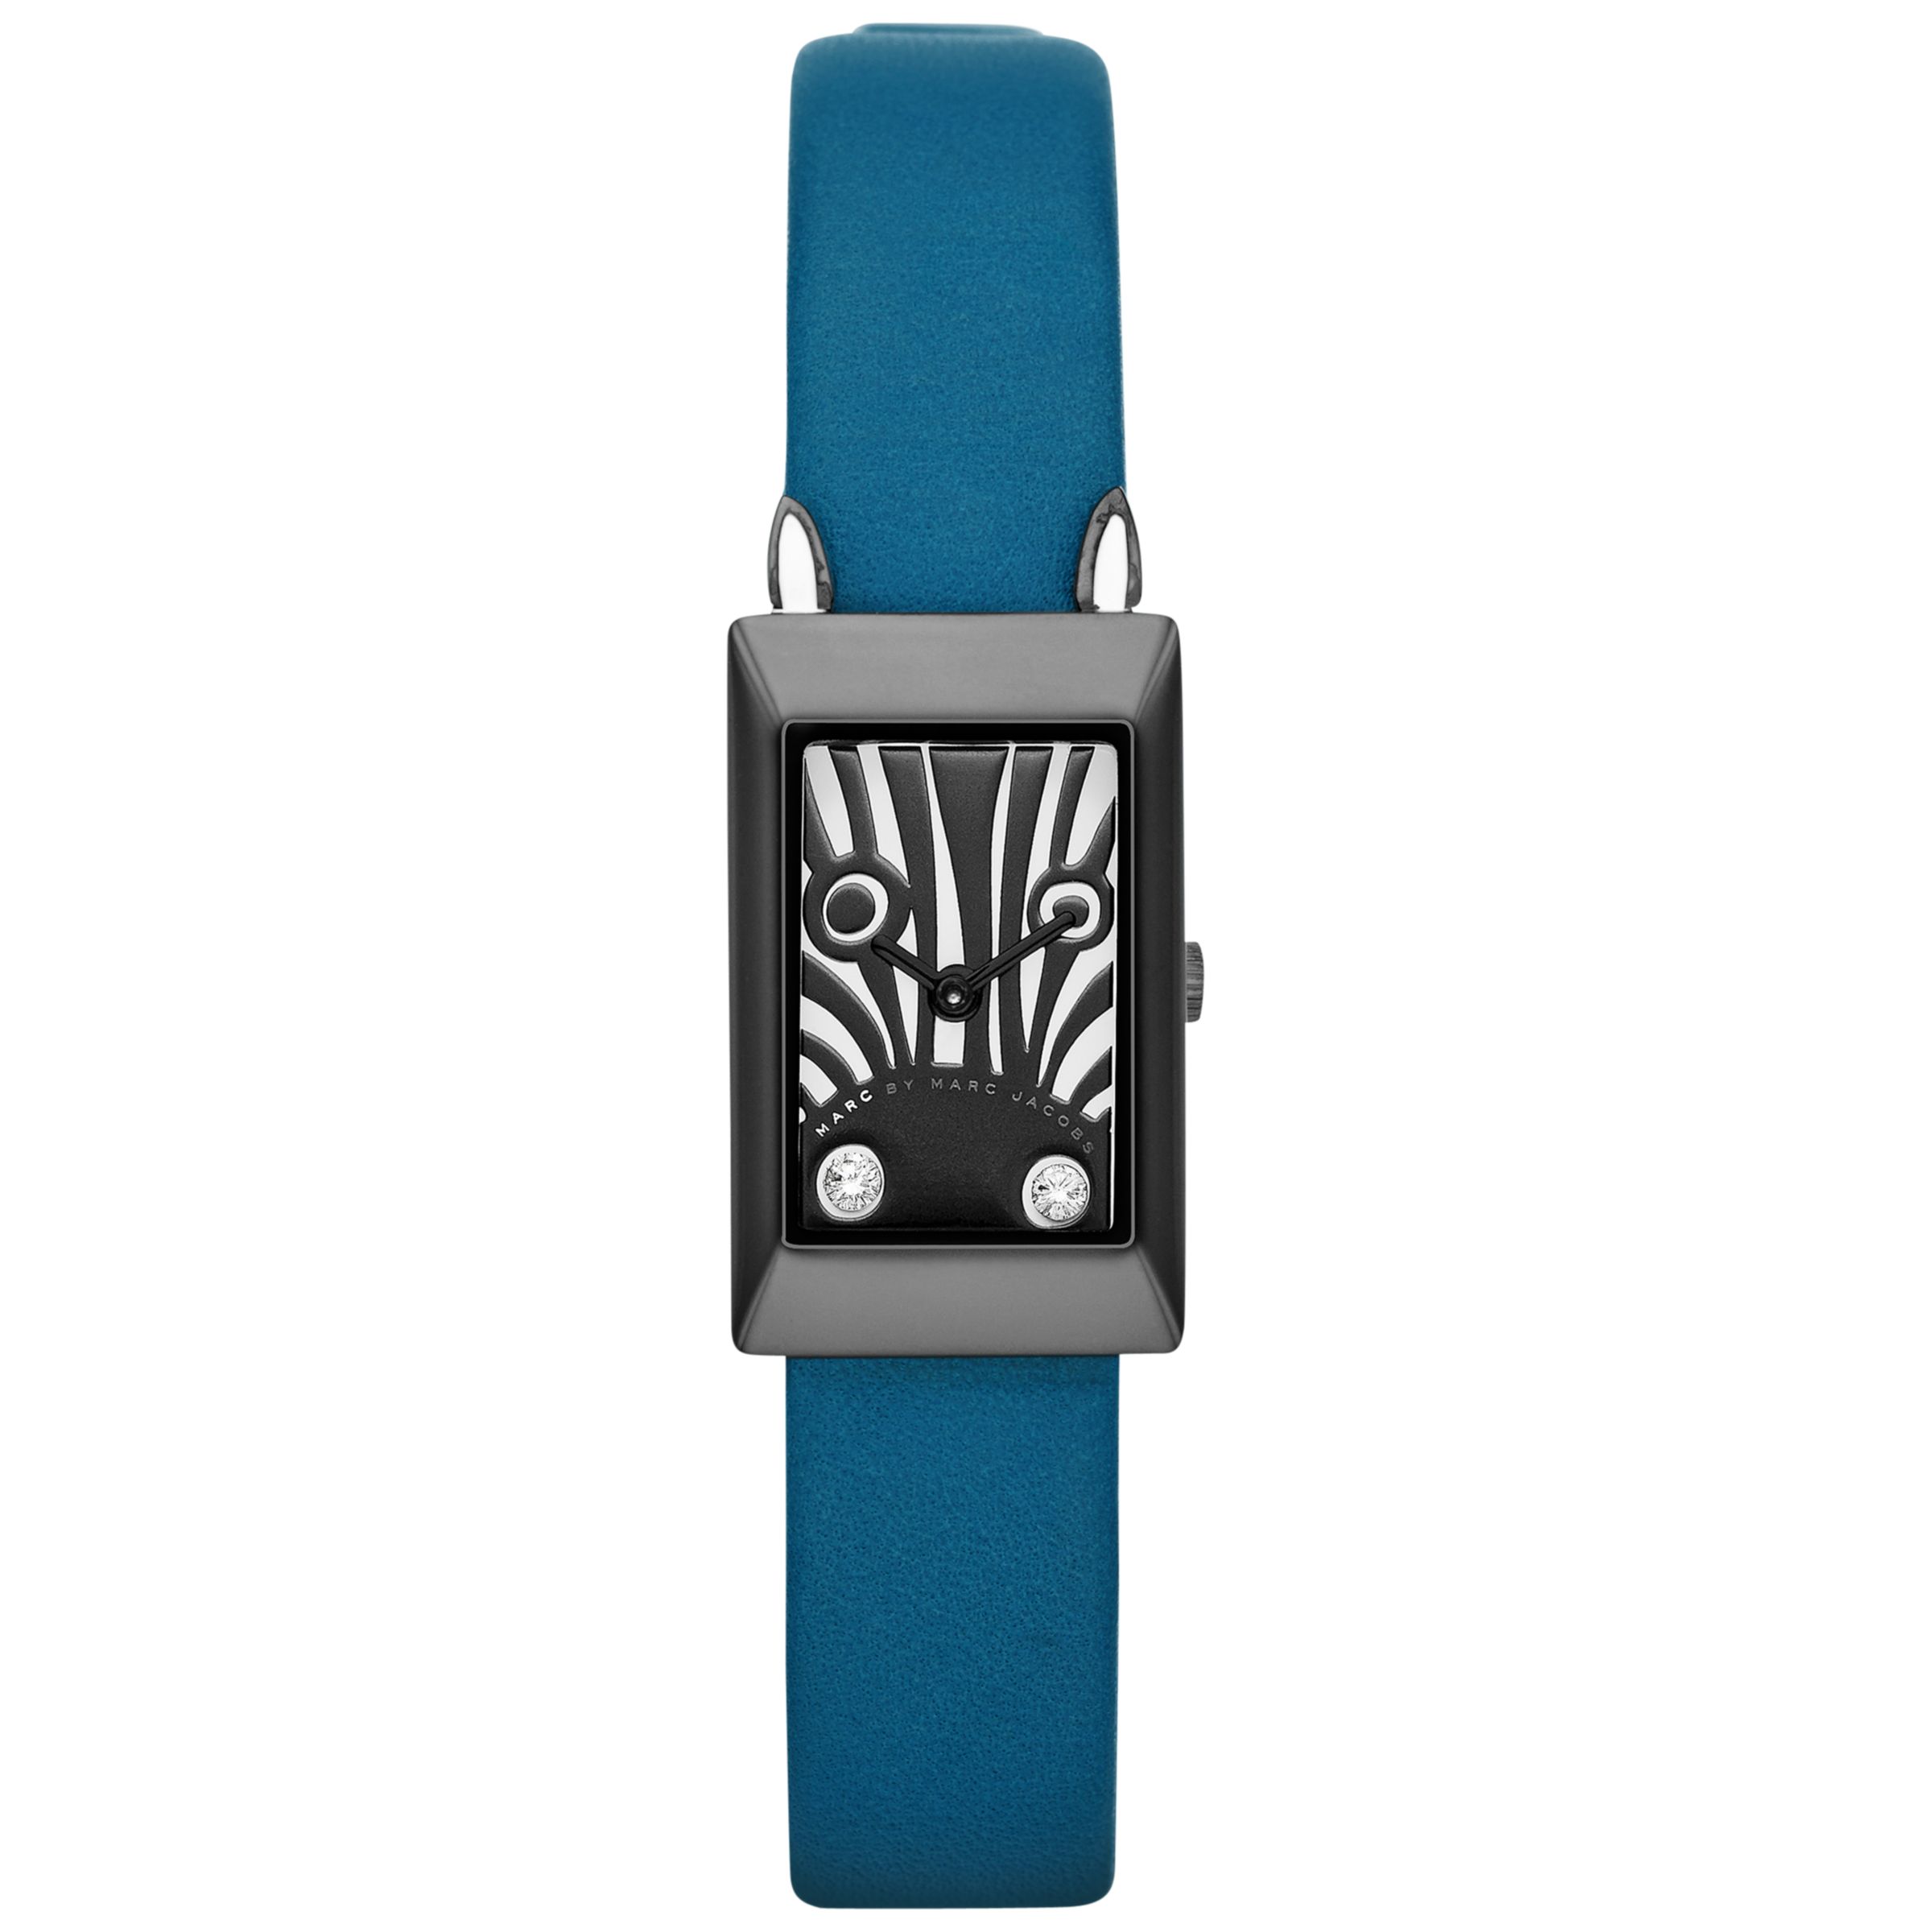 Marc by Marc Jacobs MBM2051 Zebra Critter Leather Strap Rectangular Watch, Teal